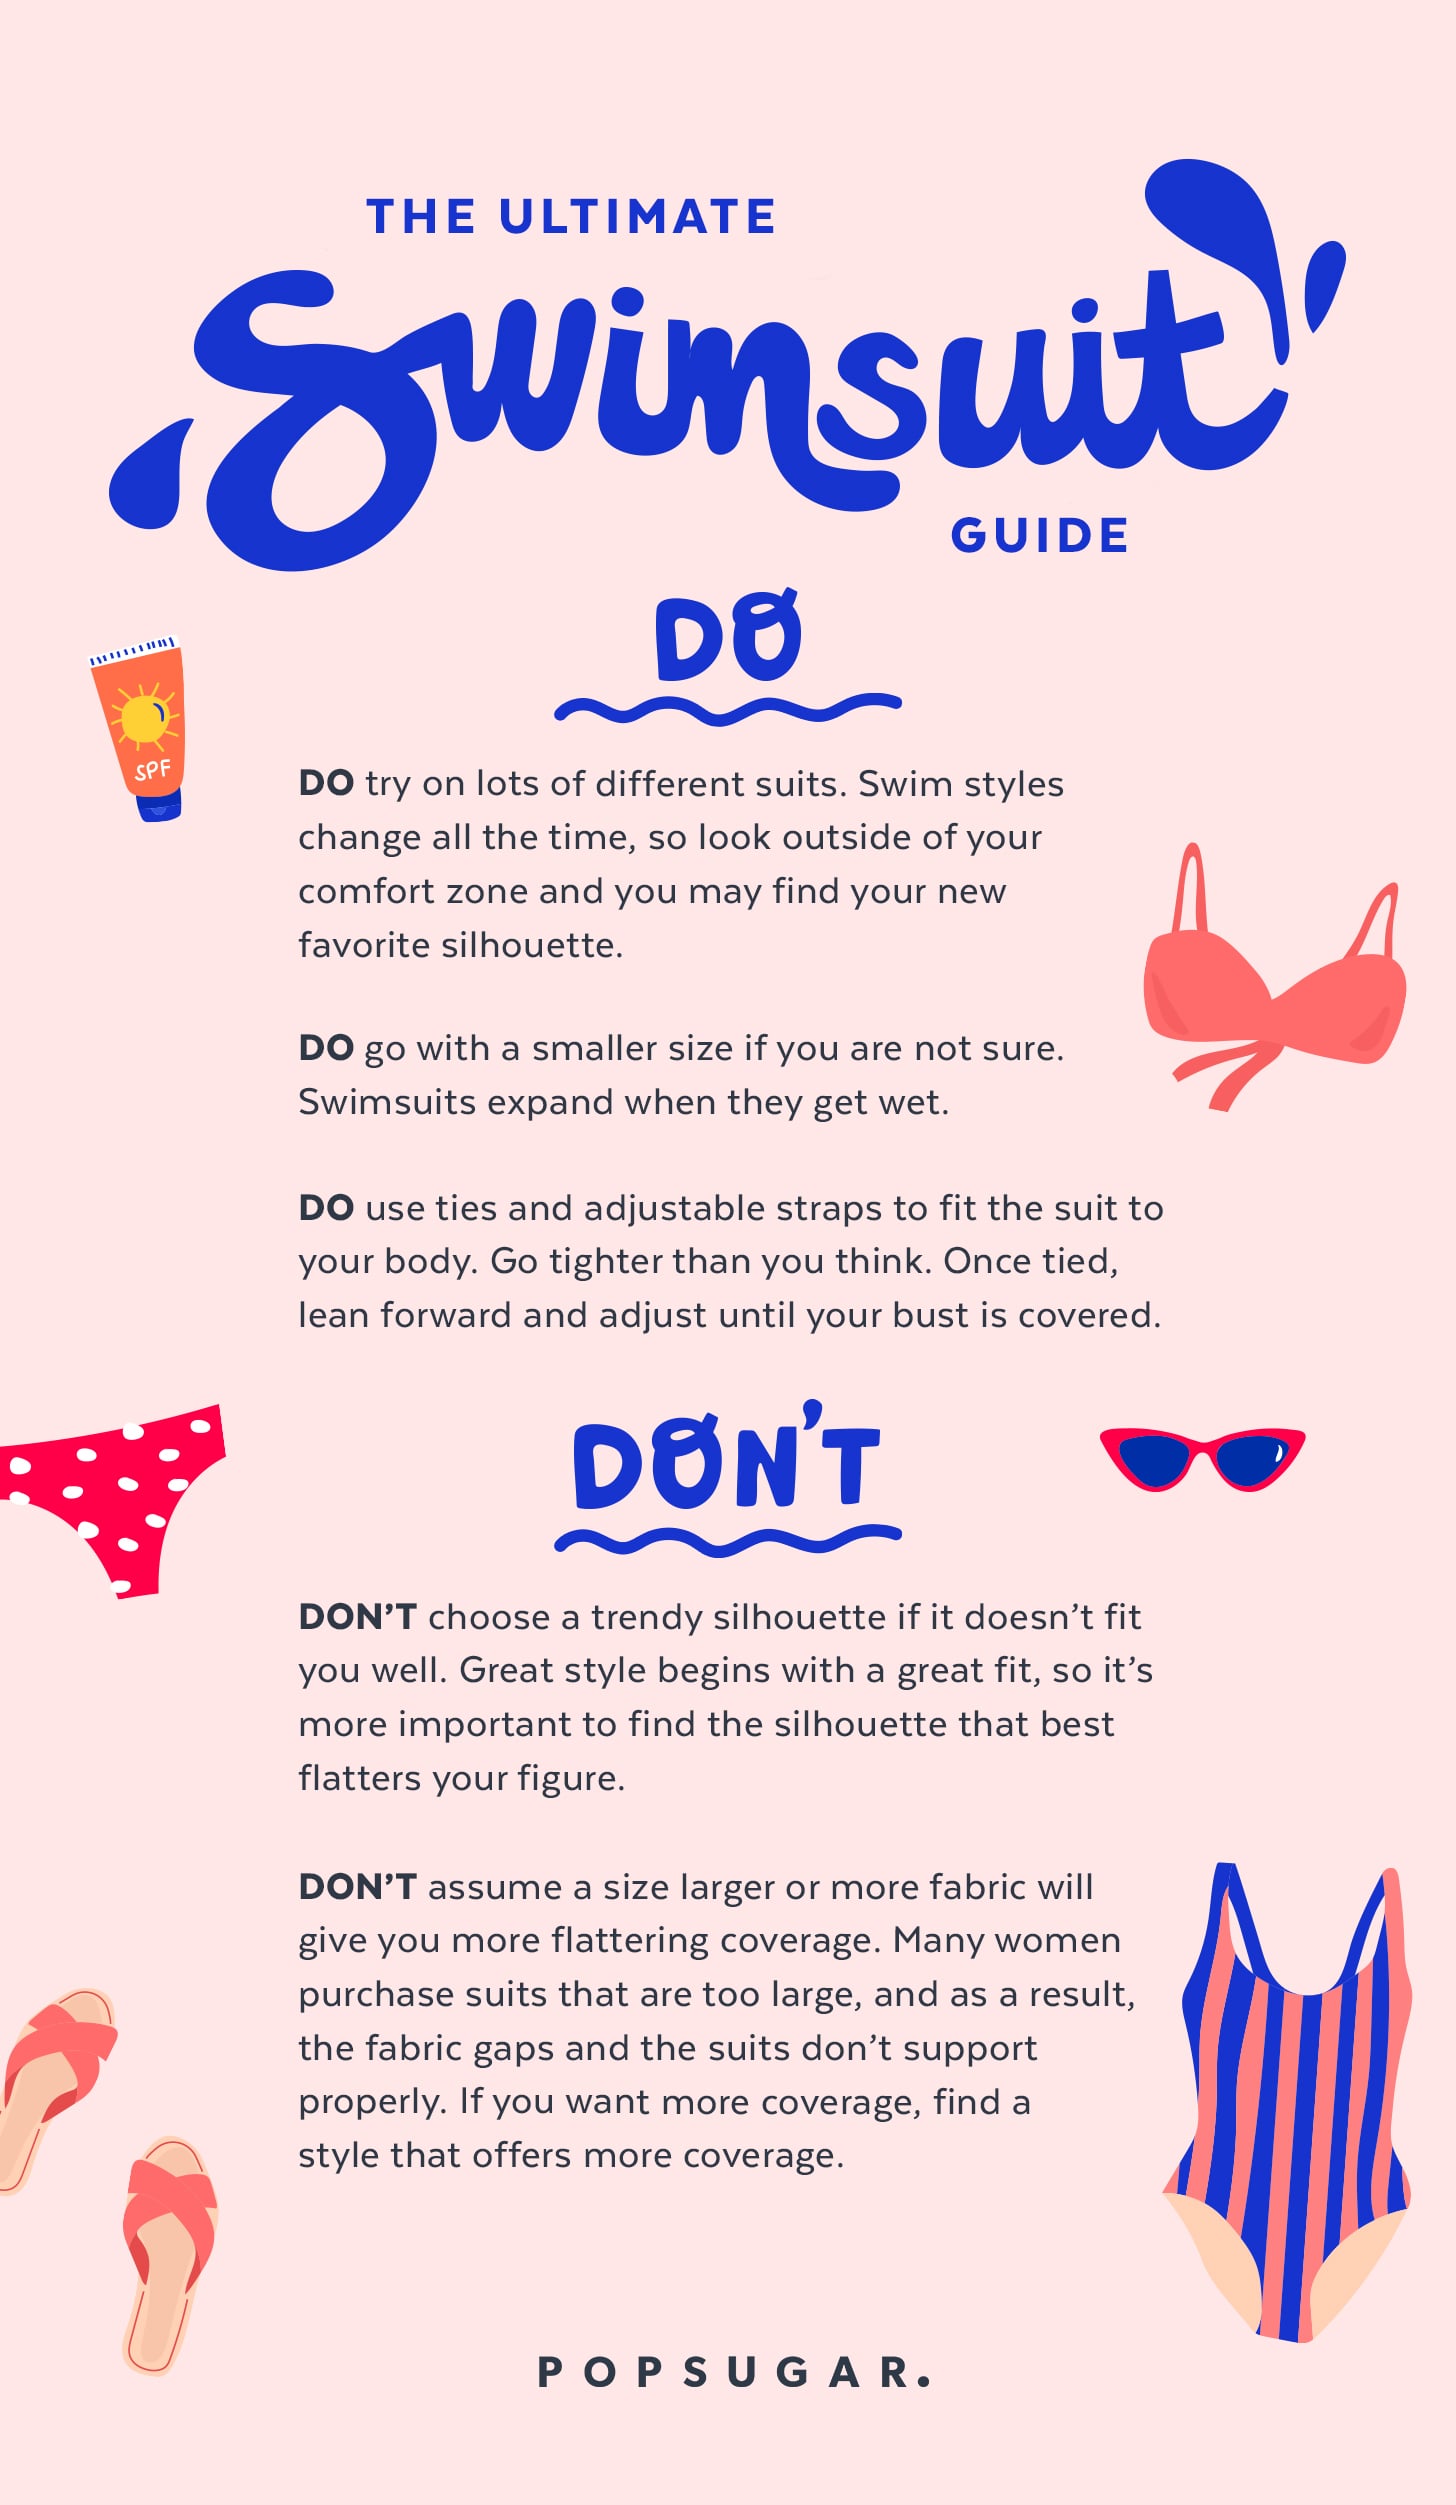 bathing suits for body types